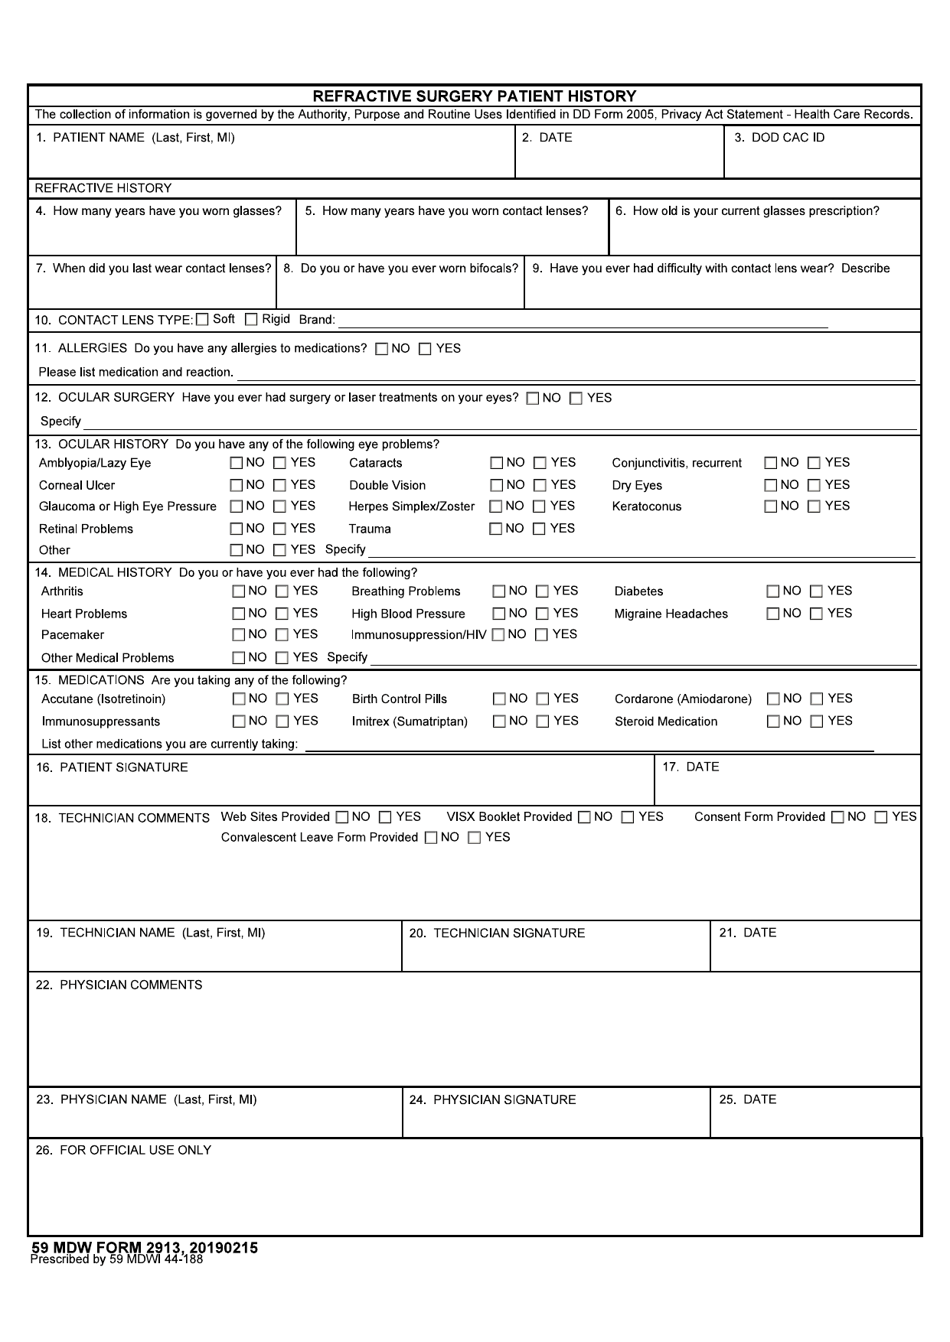 59 MDW Form 2913 Refractive Surgery Patient History, Page 1